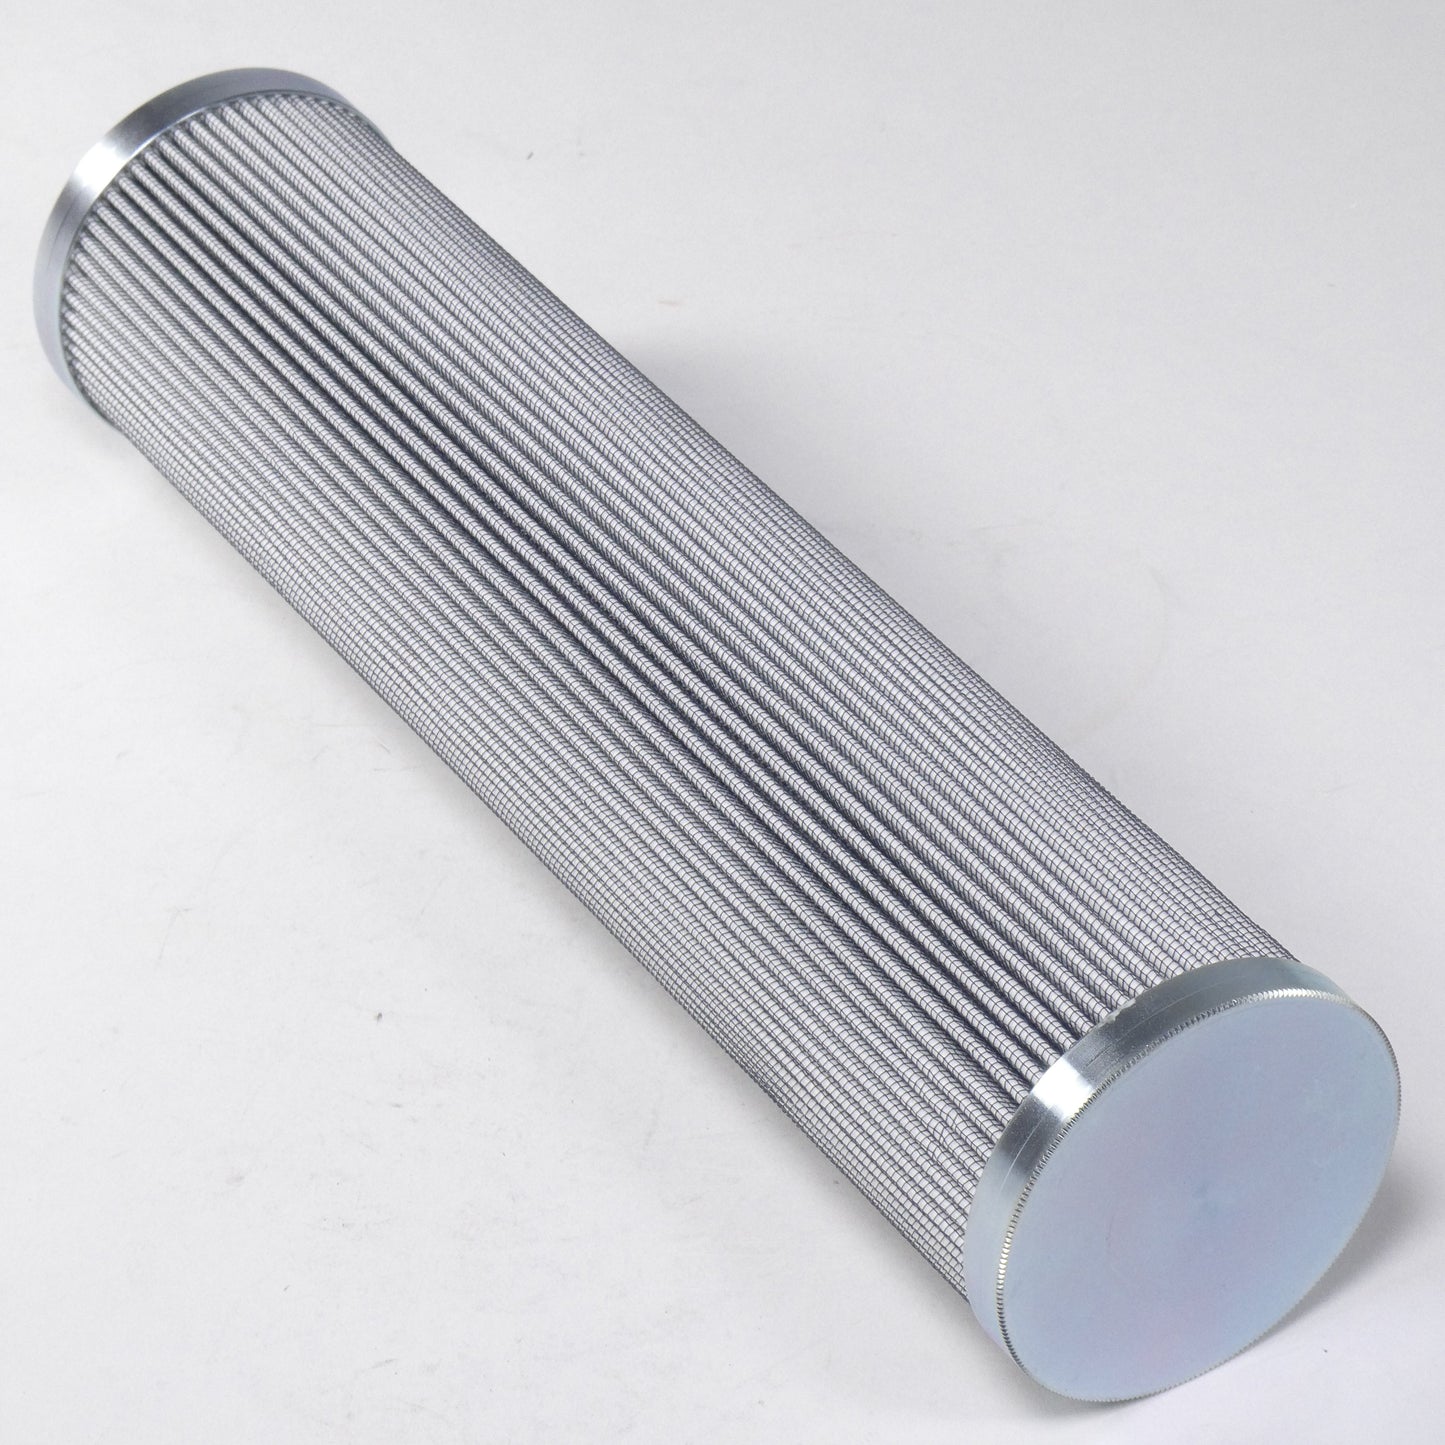 Hydrafil Replacement Filter Element for Hydac 1.11.13D03BH-EPR